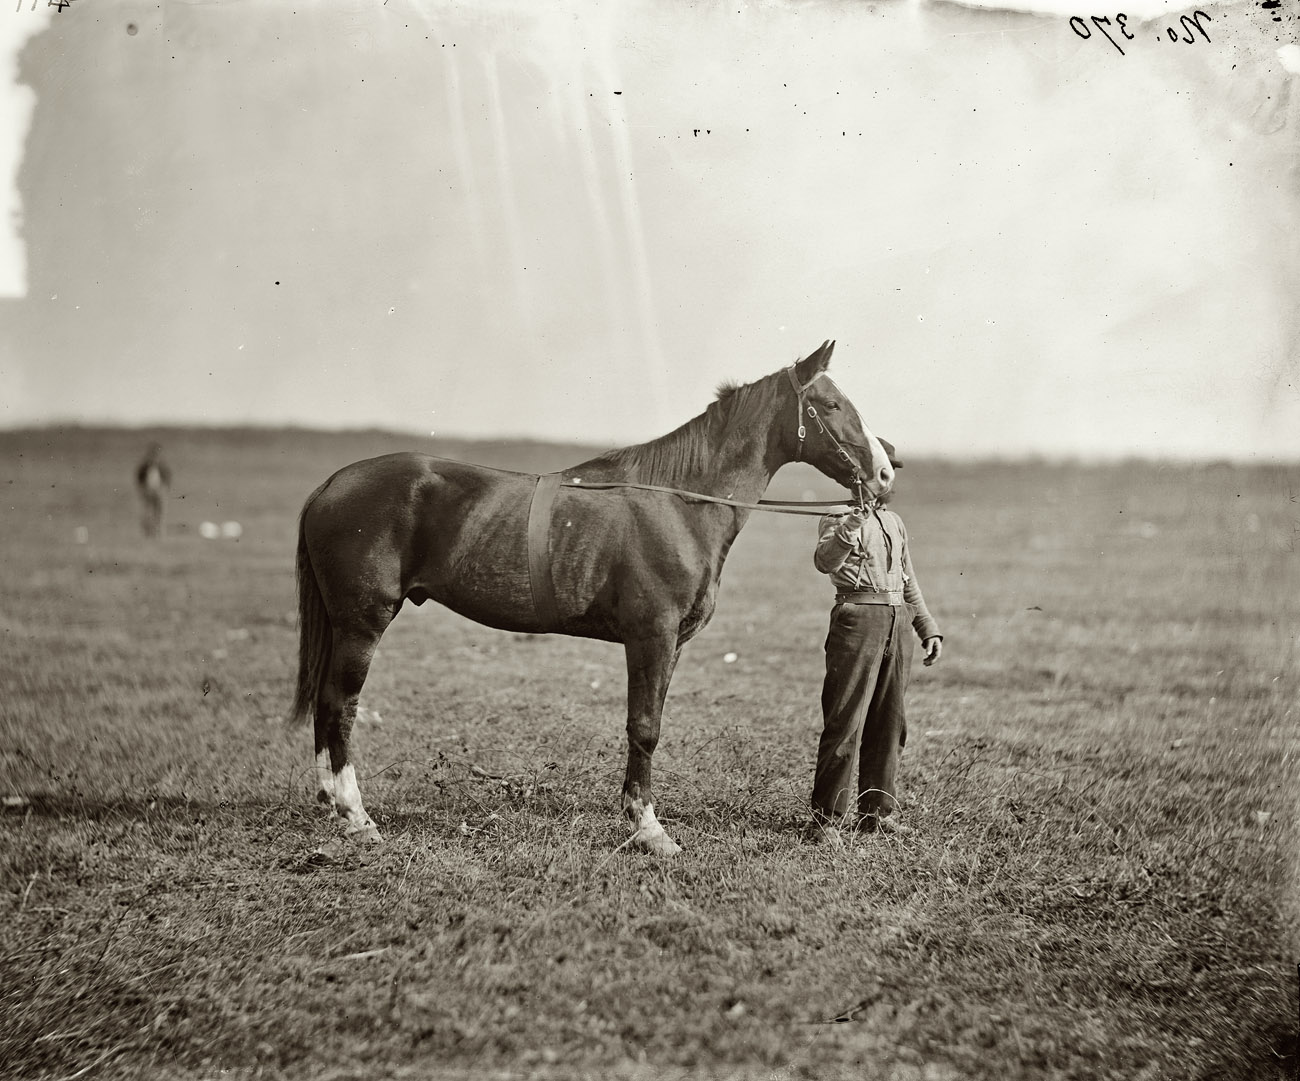 October 1863. "Culpeper, Virginia. Gen. George G. Meade's horse, Baldy." Wet plate glass negative, photographer unknown. View full size.